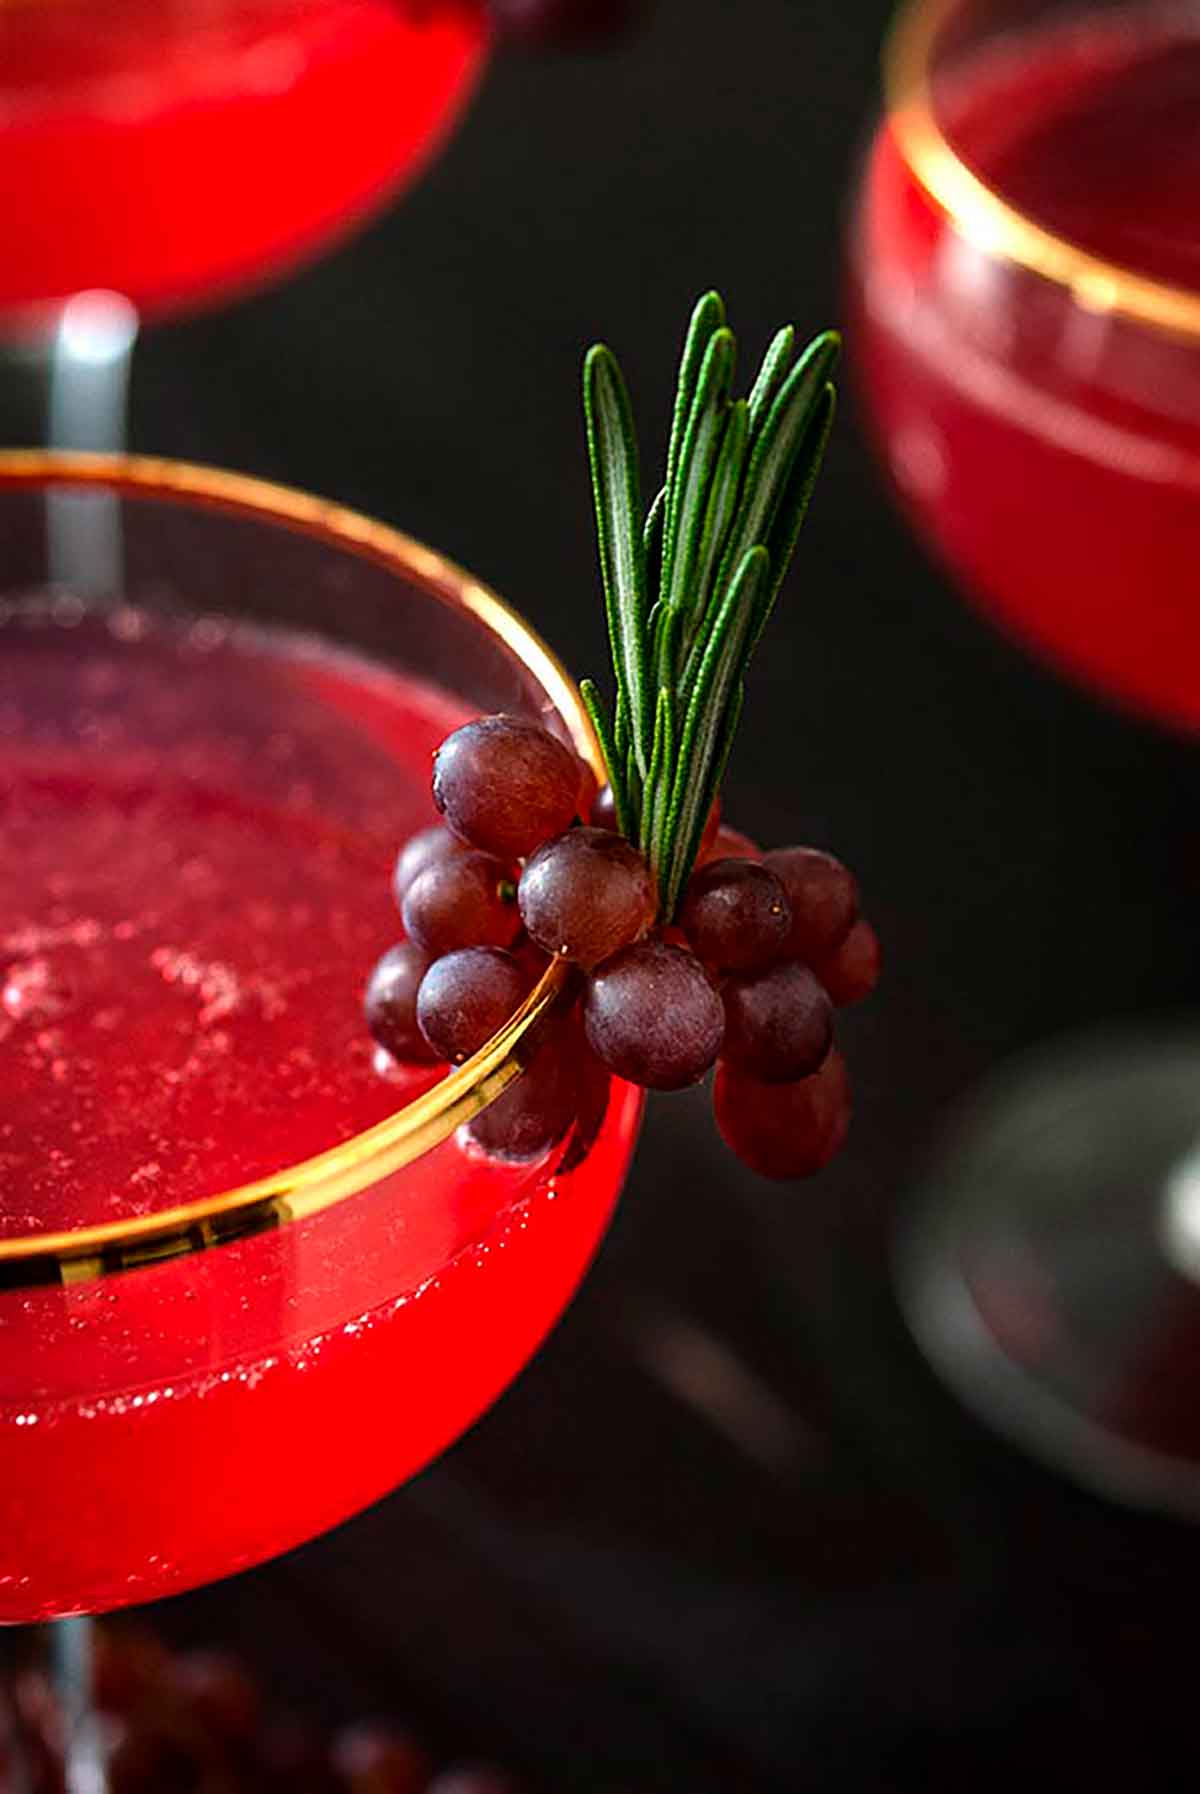 A closeup of a small grape and rosemary garnish on the edge of a cocktail glass.